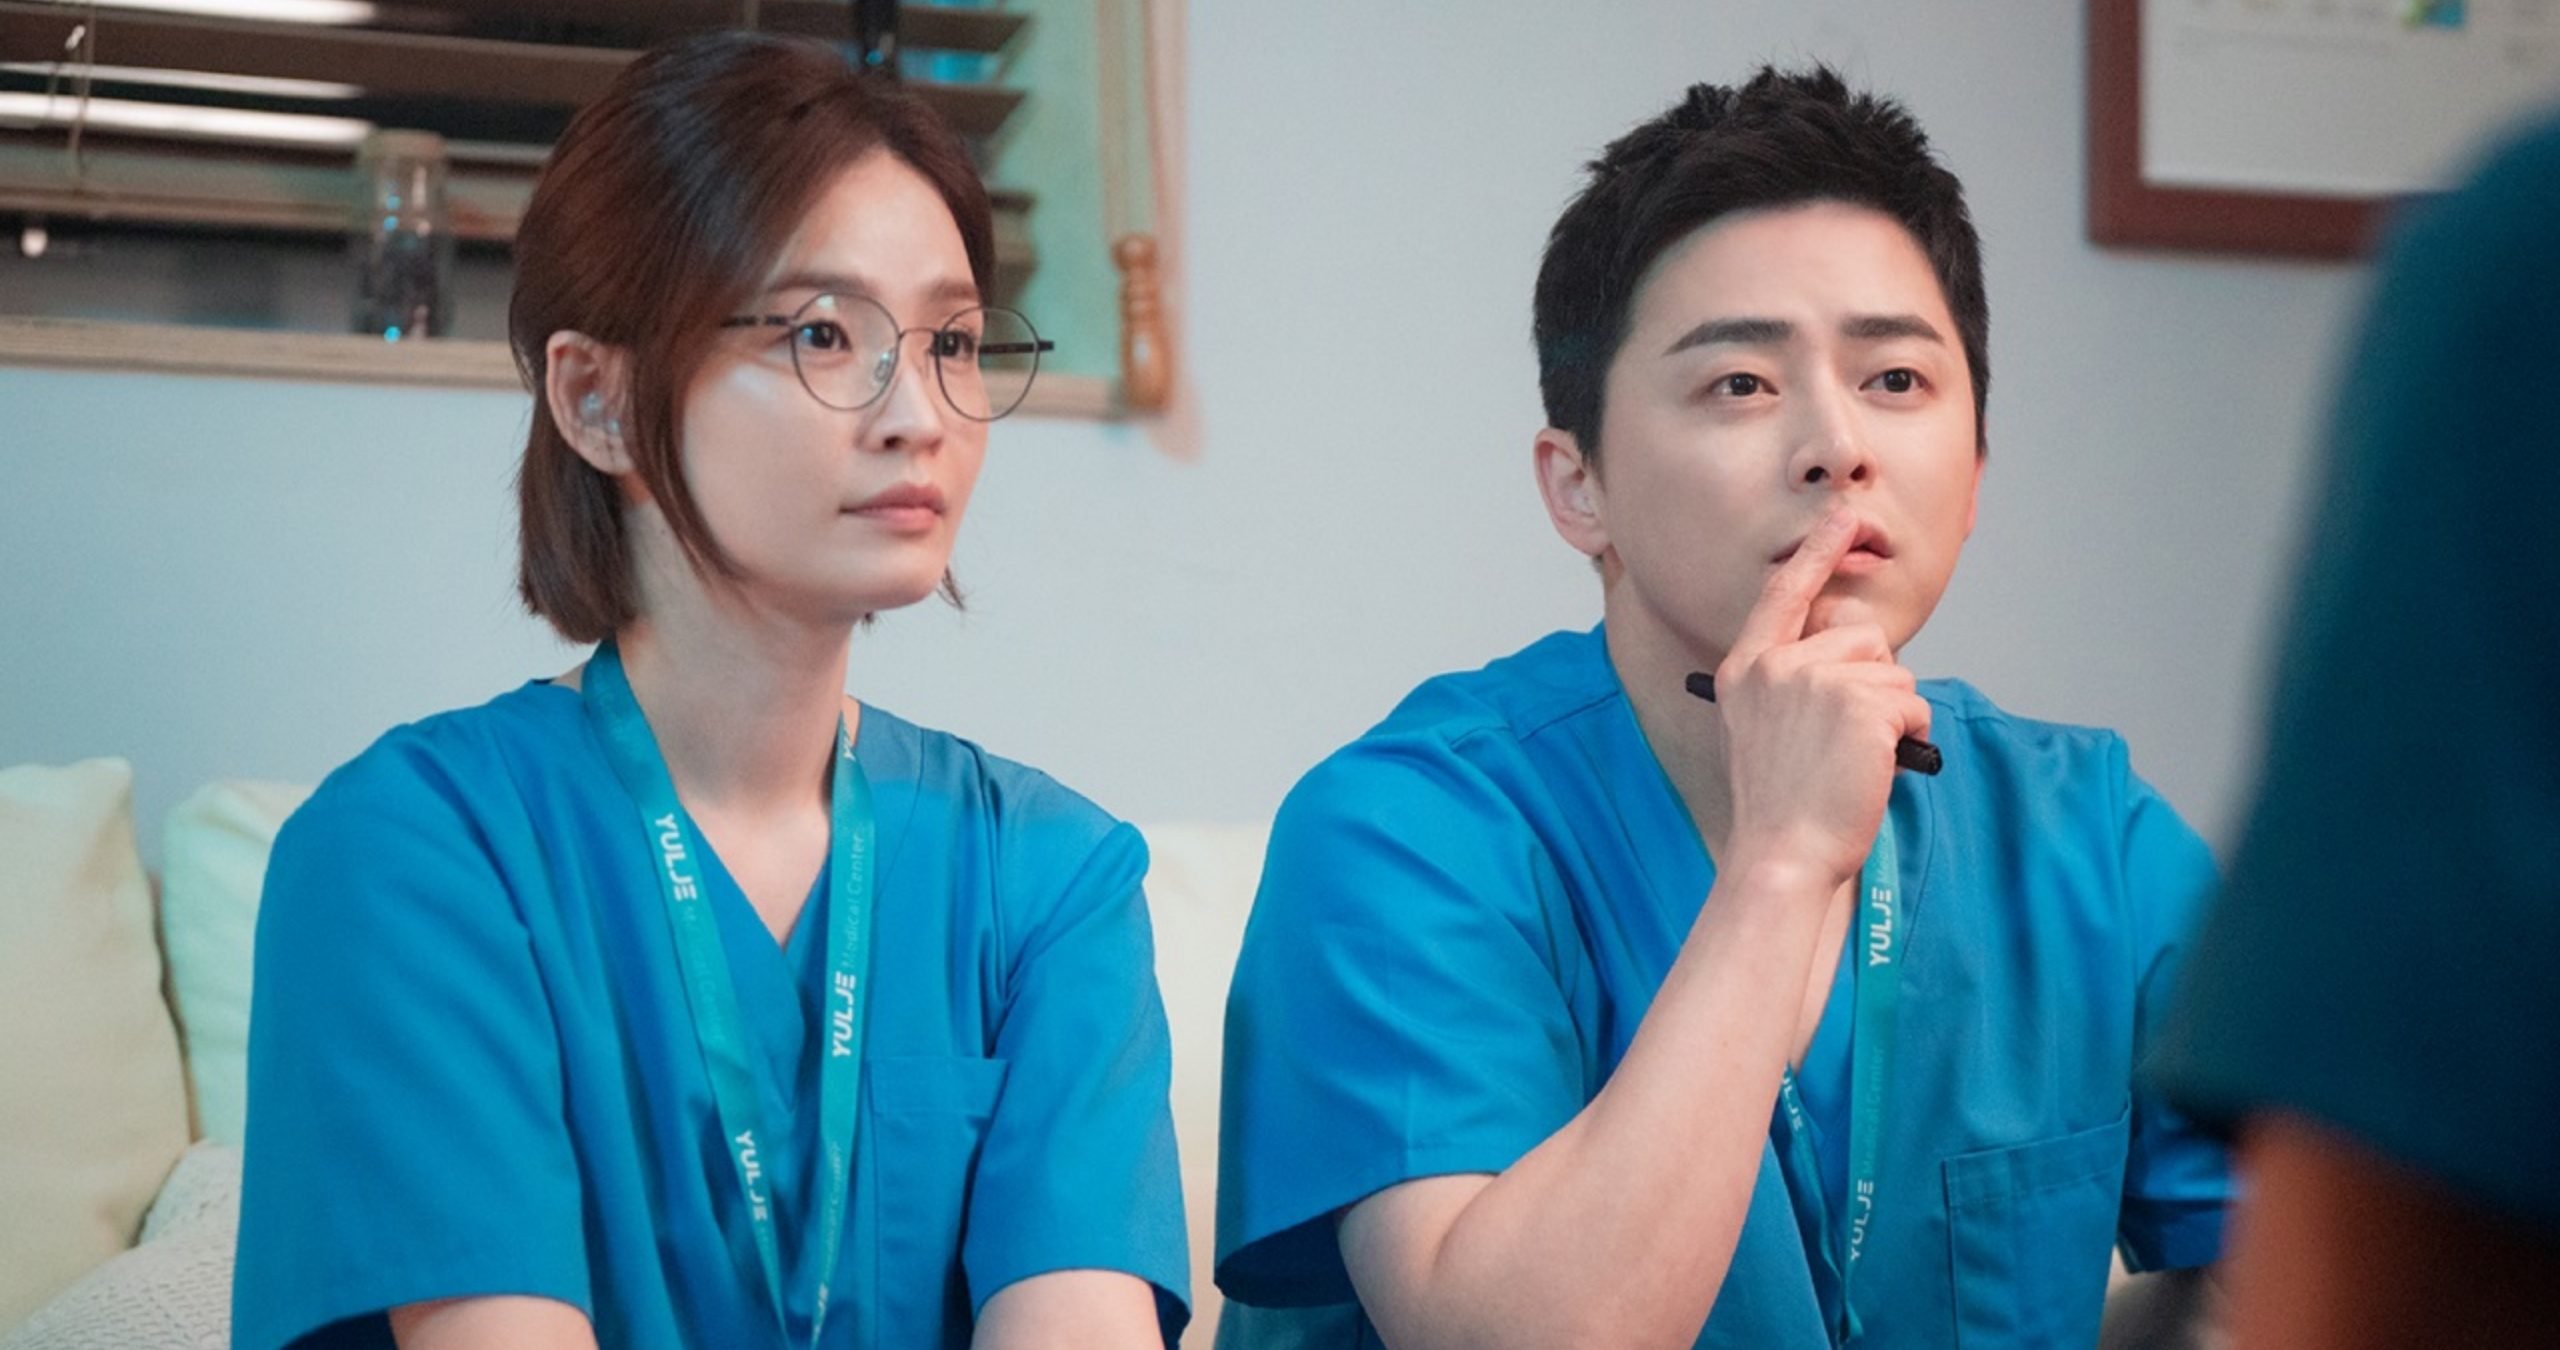 Characters Song-Hwa and Ik-Joon in 'Hospital Playlist' wearing blue doctor scrubs